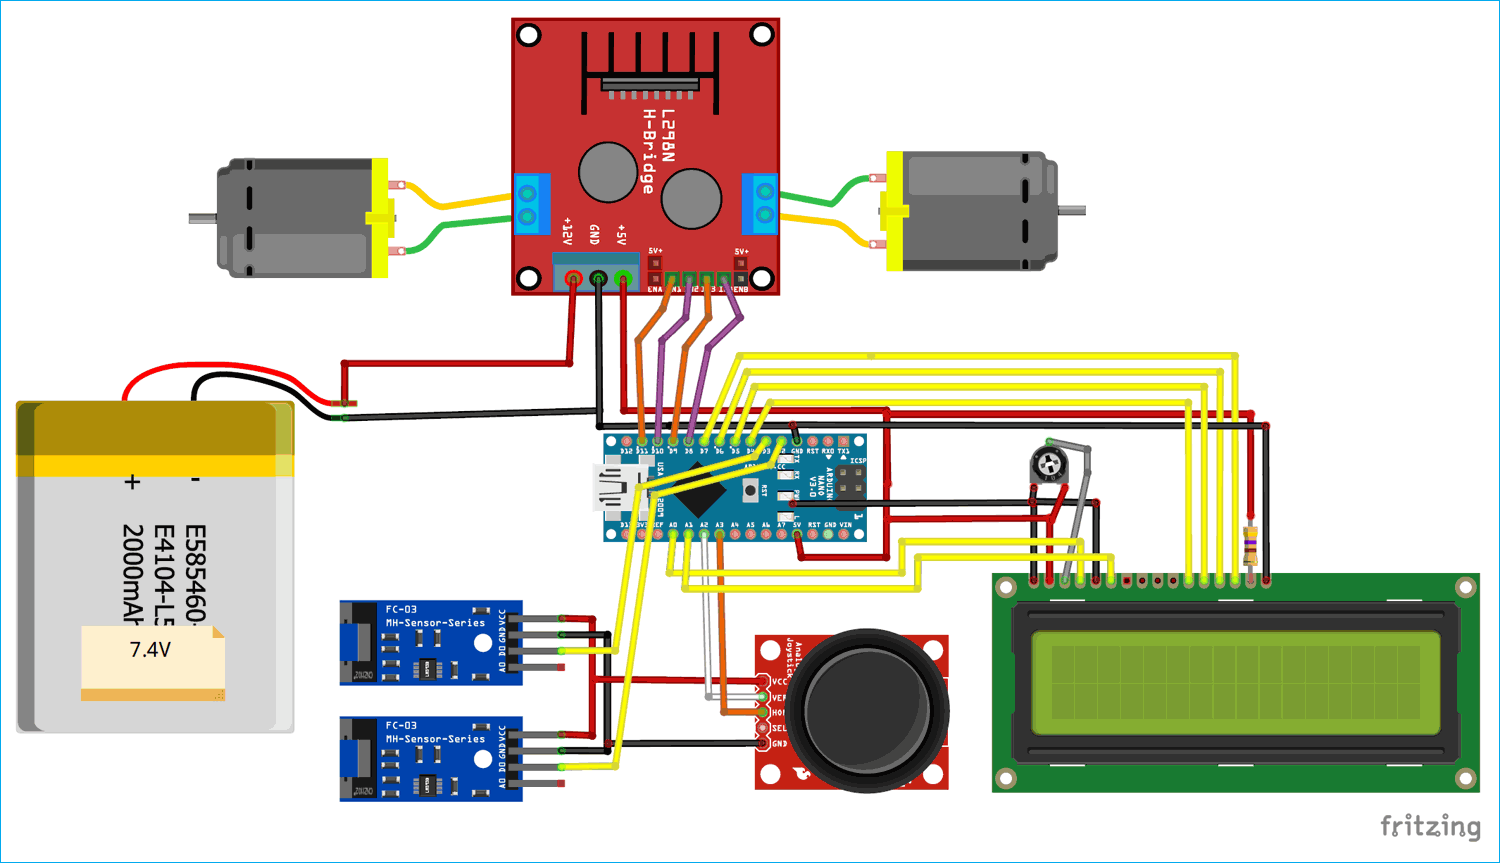 Circuit Diagram for Speed, Distance Measurement for Mobile Robots using Arduino and LM393 Sensor (H206)